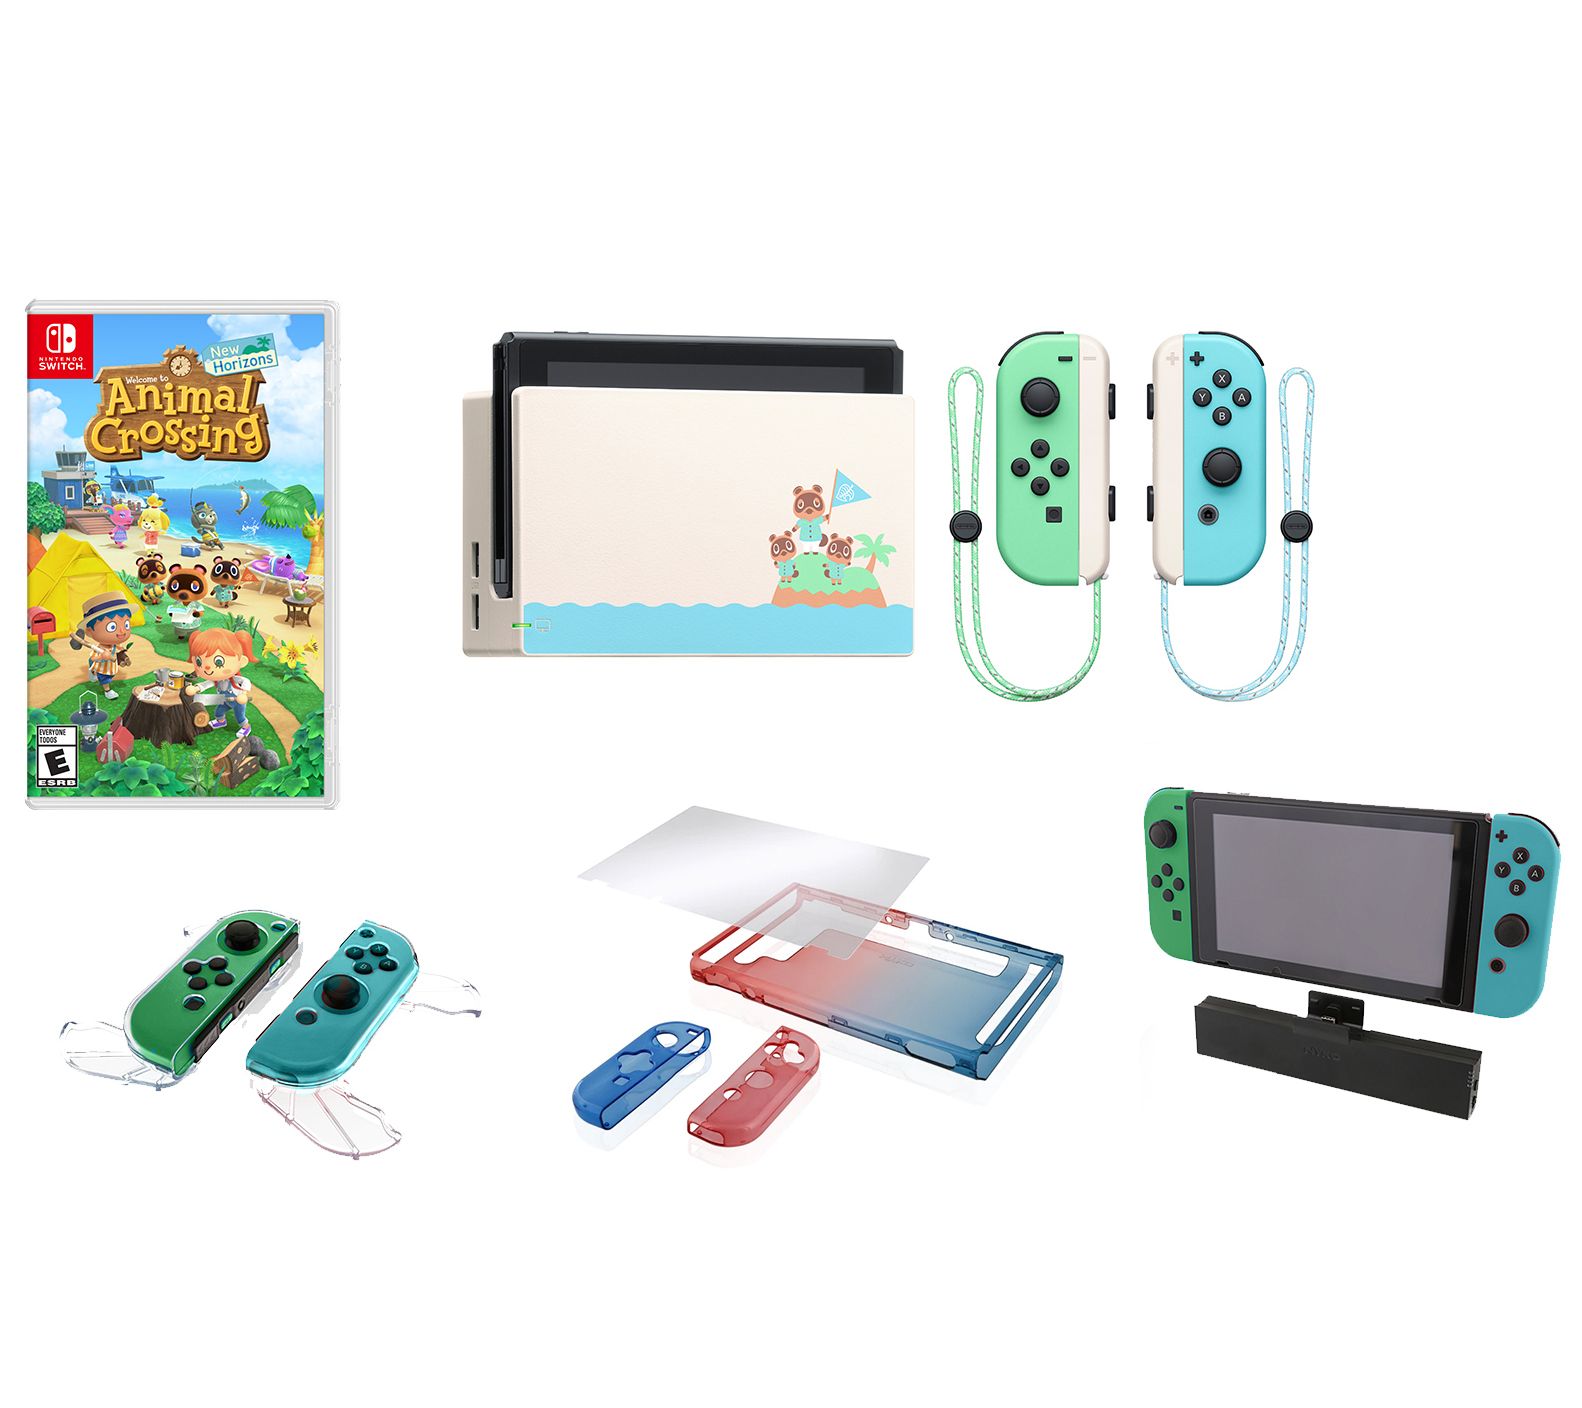 Nintendo Switch w/ Animal Crossing Protective Case & Accessories